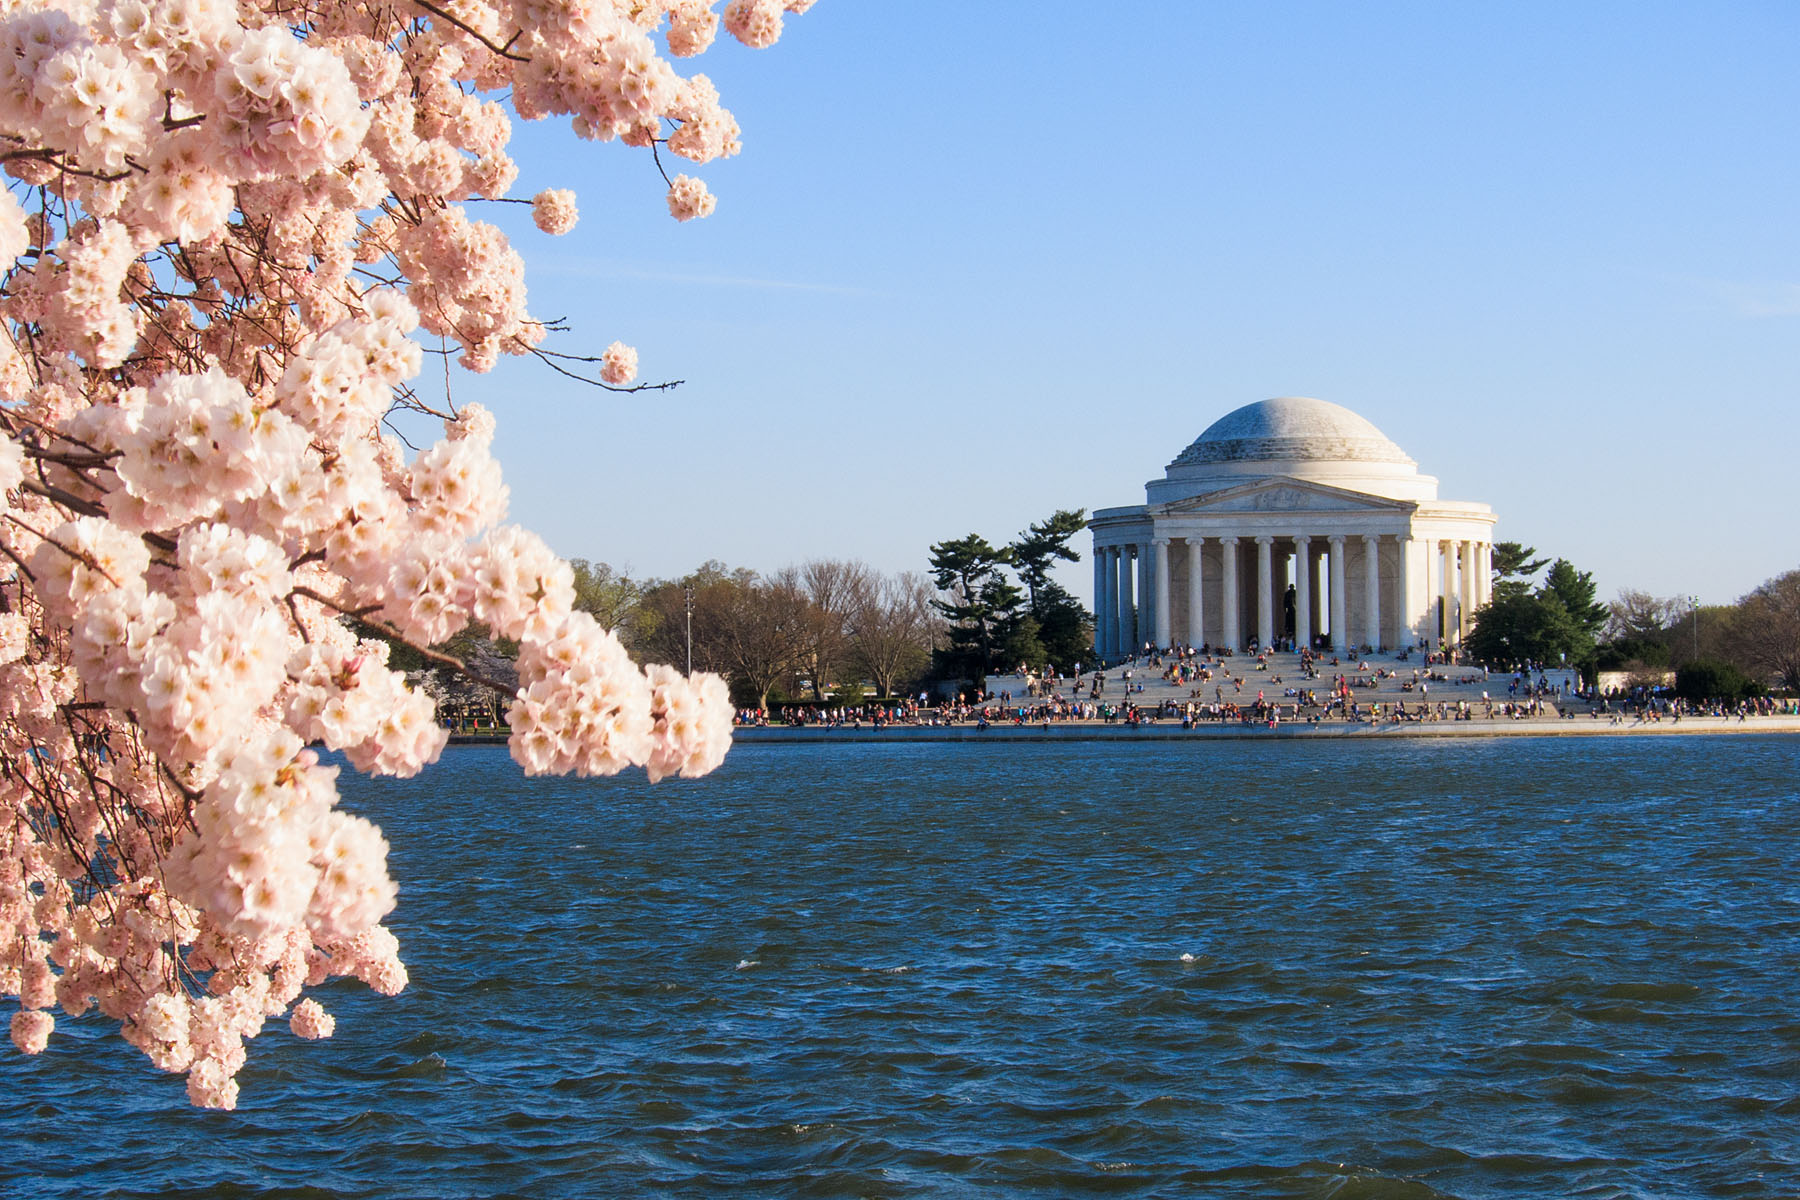 Cherry Blossom Festival at the Tidal Basin, looking across to the Jefferson Memorial, Washington, DC, April 2014.  Click for next photo.